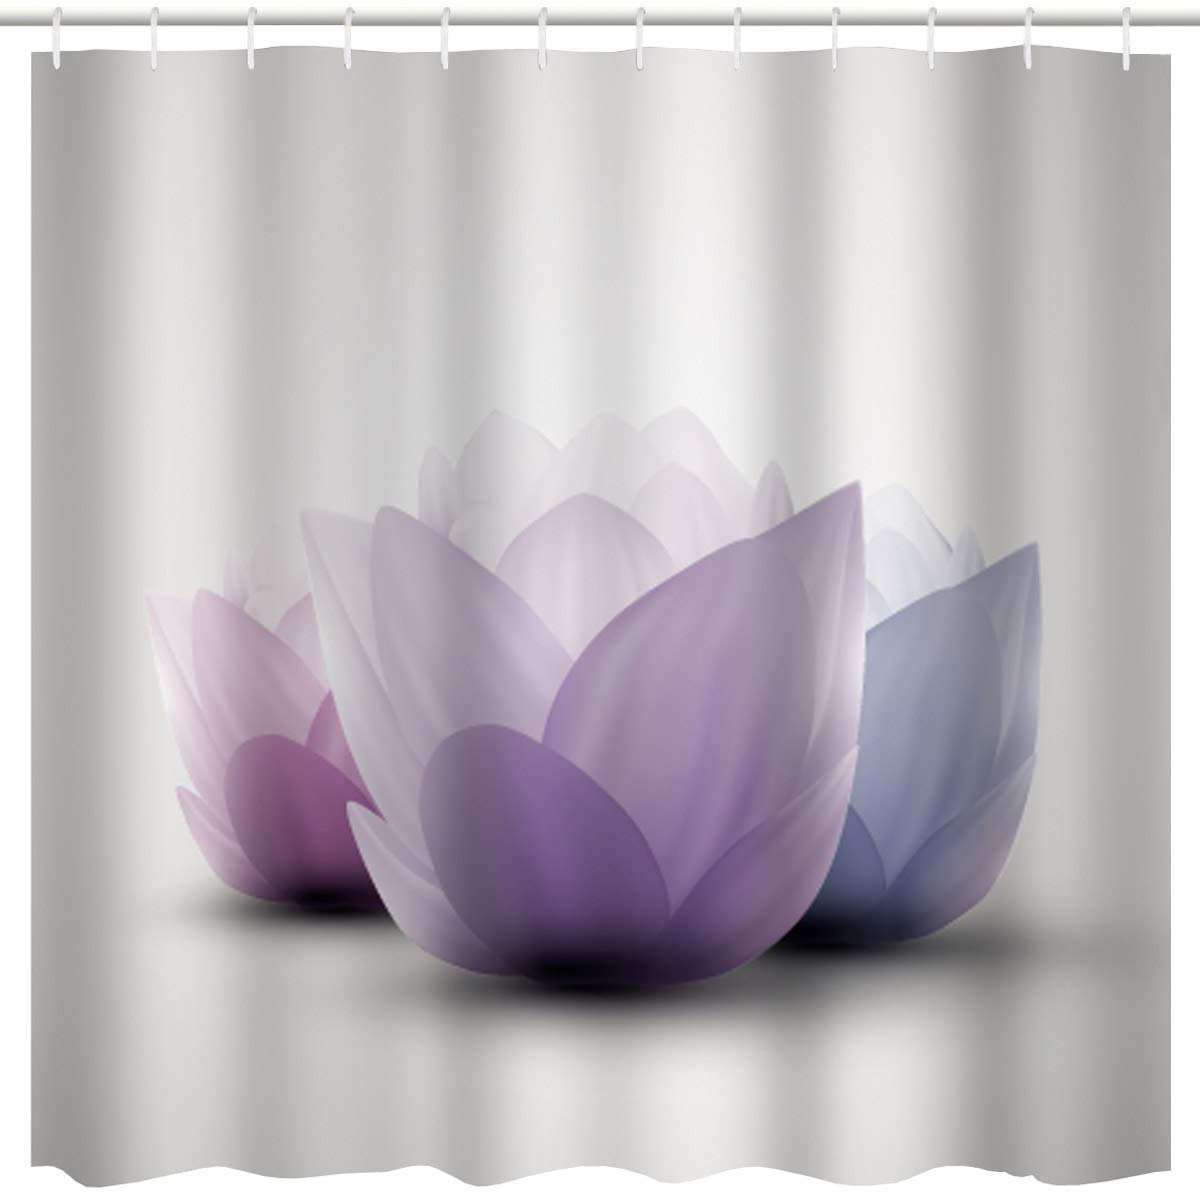 BROSHAN Omber Shower Curtain Flower Design, Modern Lotus Blossom Purple and White Abstract Art Print, Yoga Fabric Waterproof Bathroom Decor Set with Hooks, 72 Inches Long